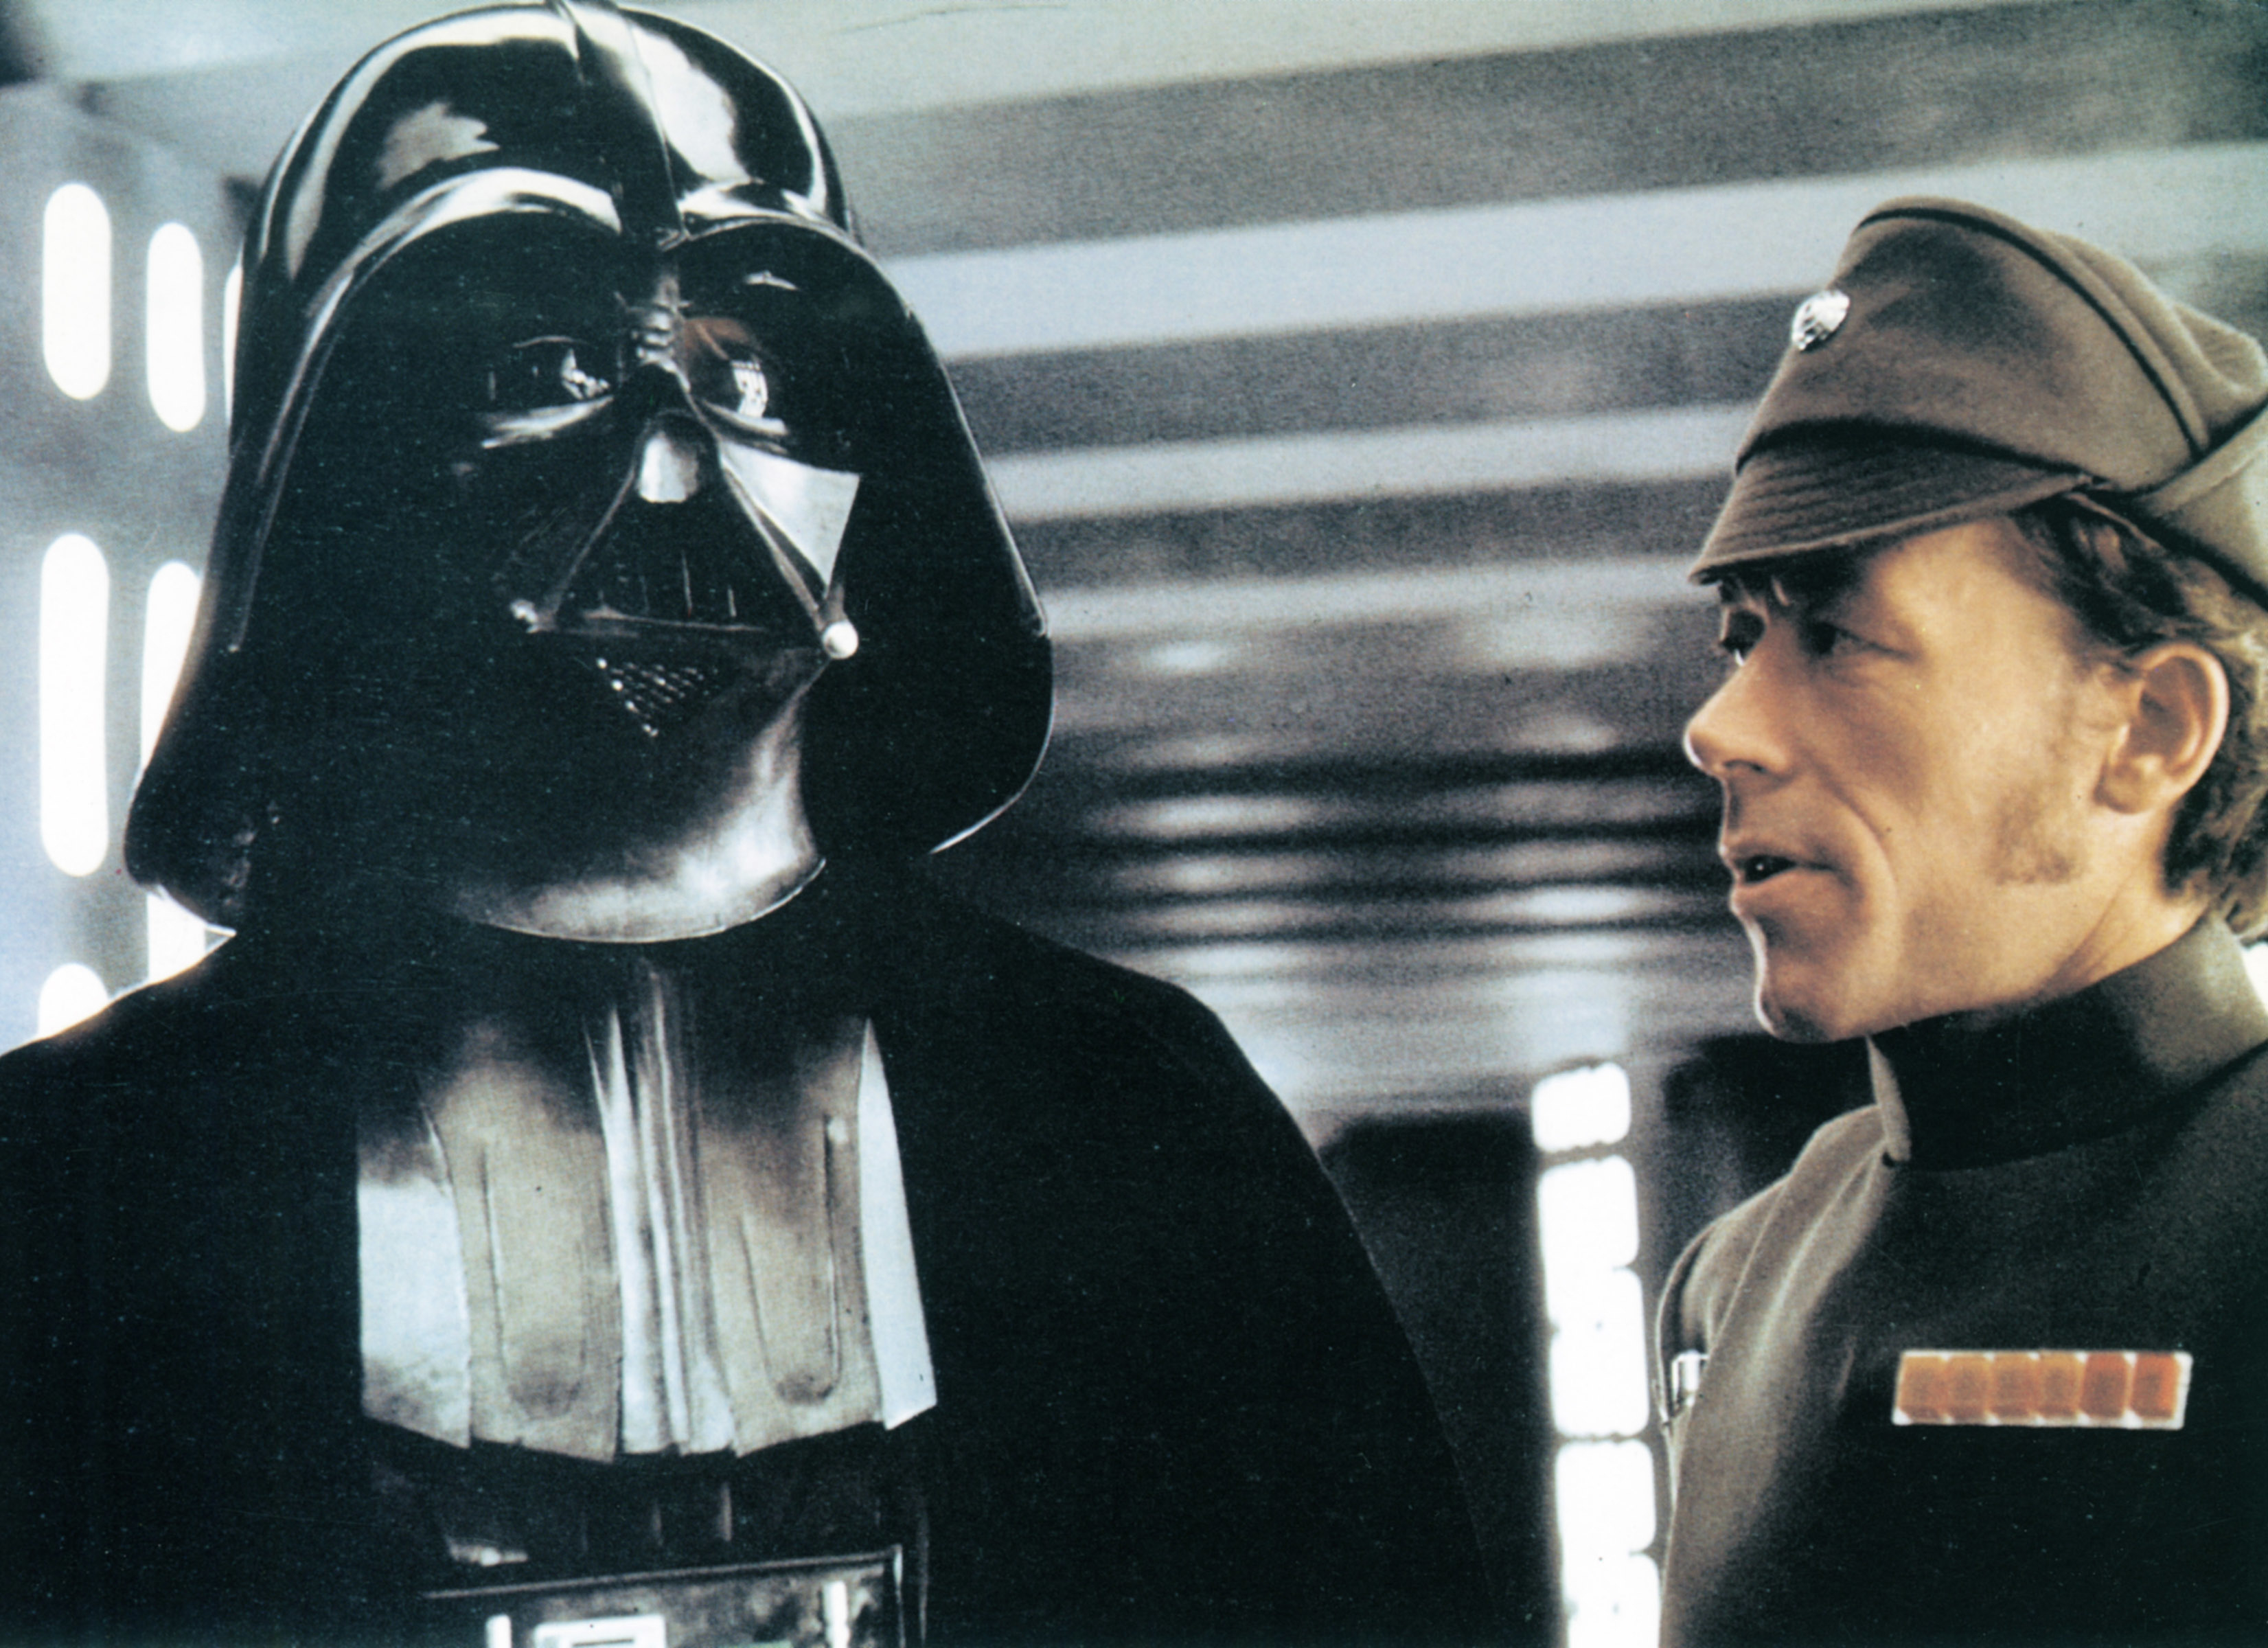 Darth Vader and Imperial Officer stand together aboard the Death Star